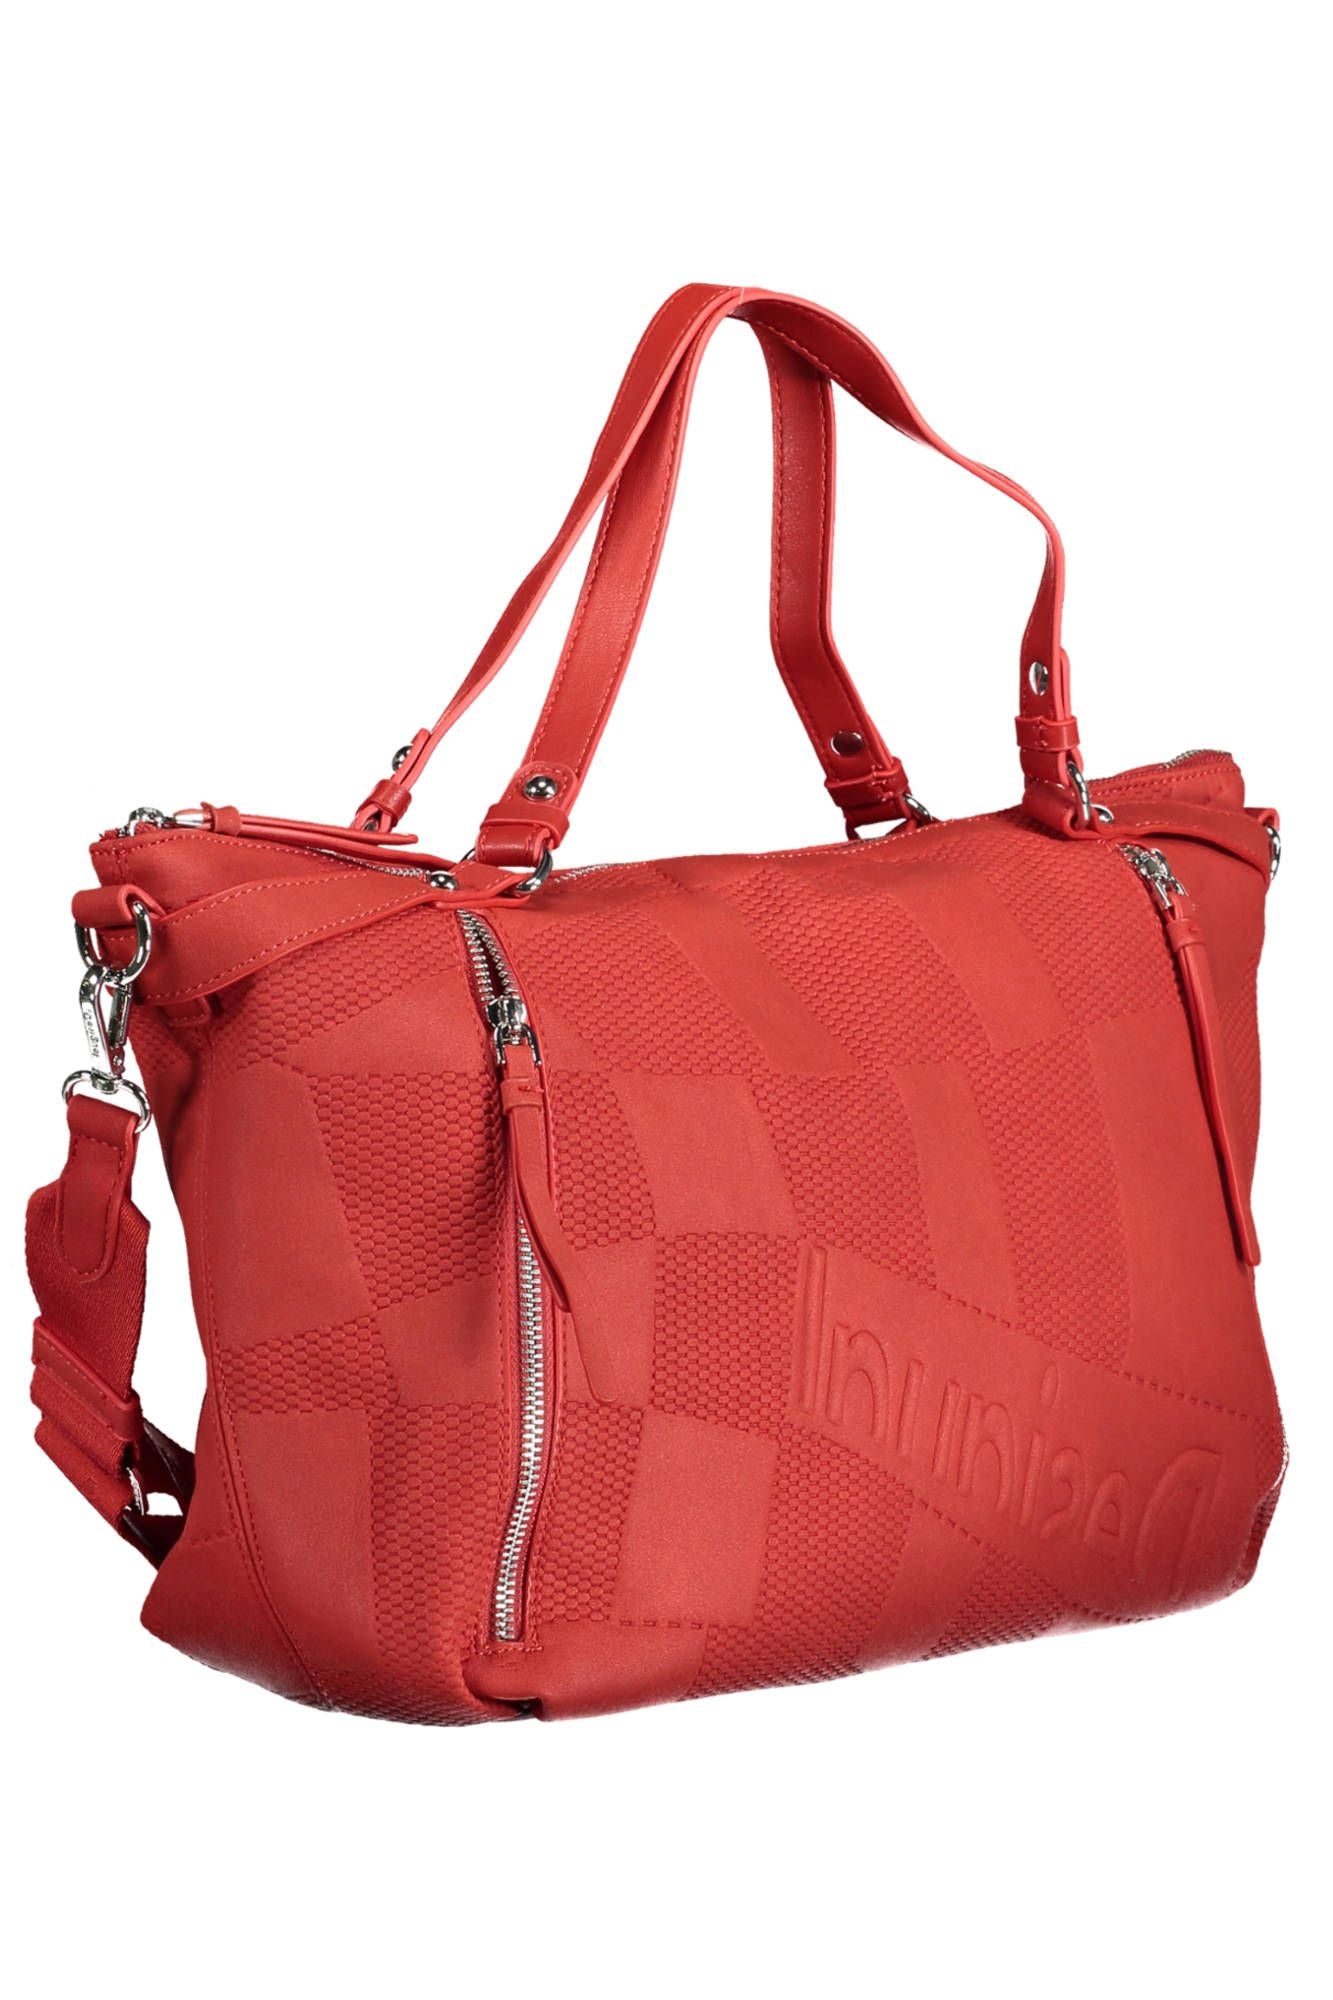 Elevate Your Style with a Vibrant Red Handbag